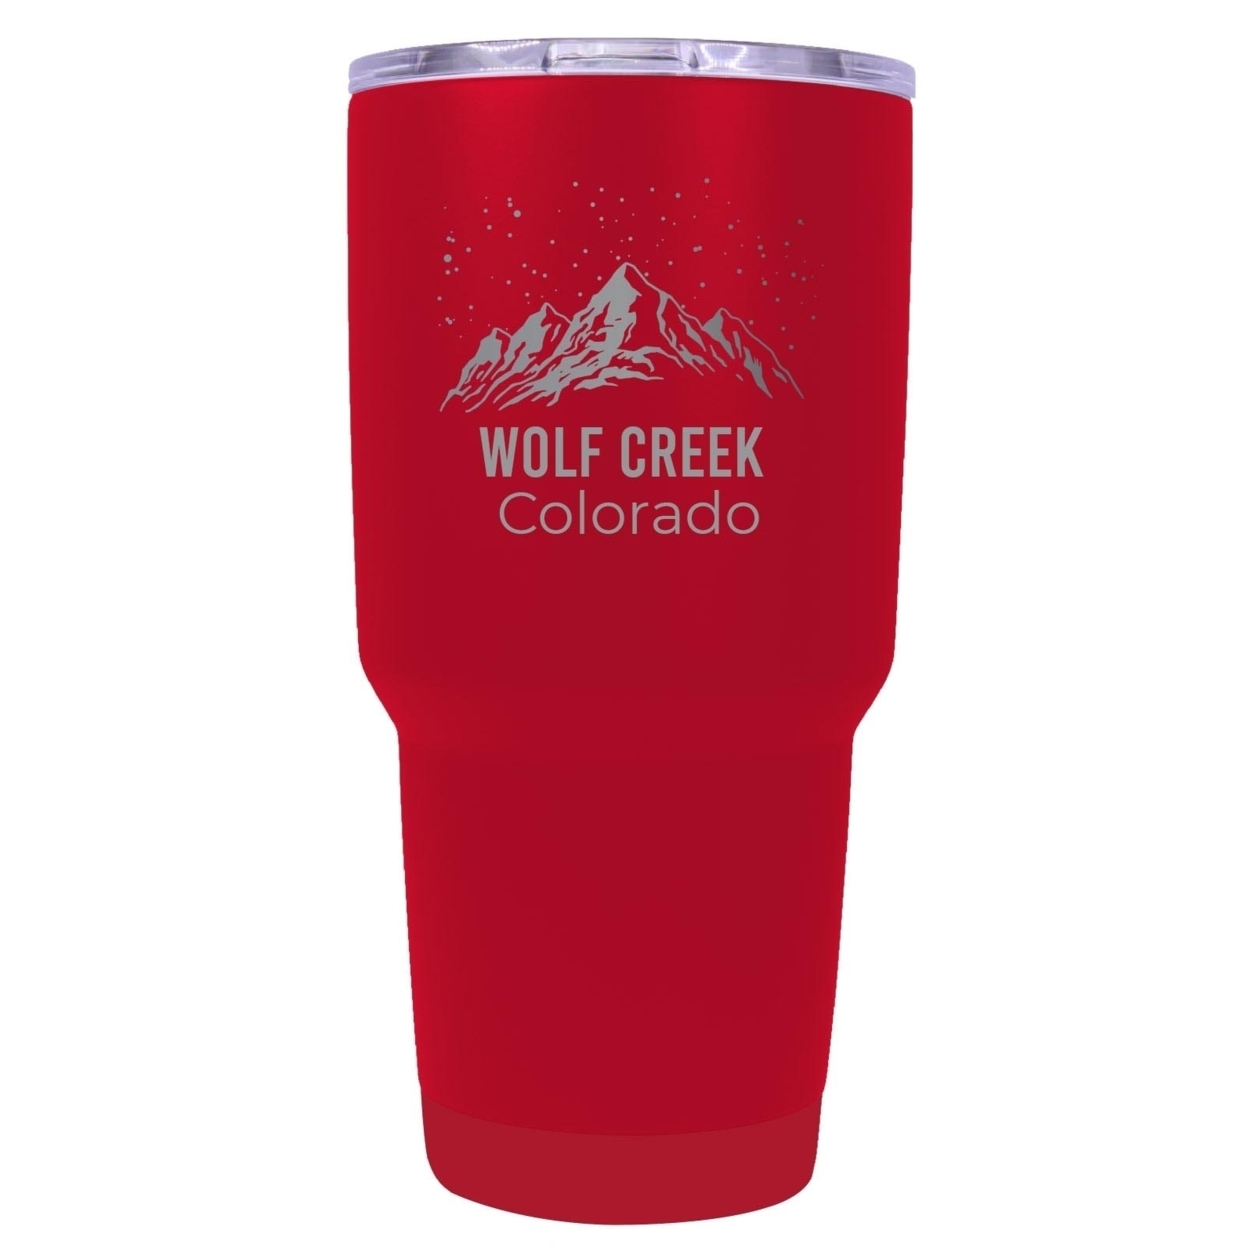 Wolf Creek Colorado Ski Snowboard Winter Souvenir Laser Engraved 24 Oz Insulated Stainless Steel Tumbler - Red